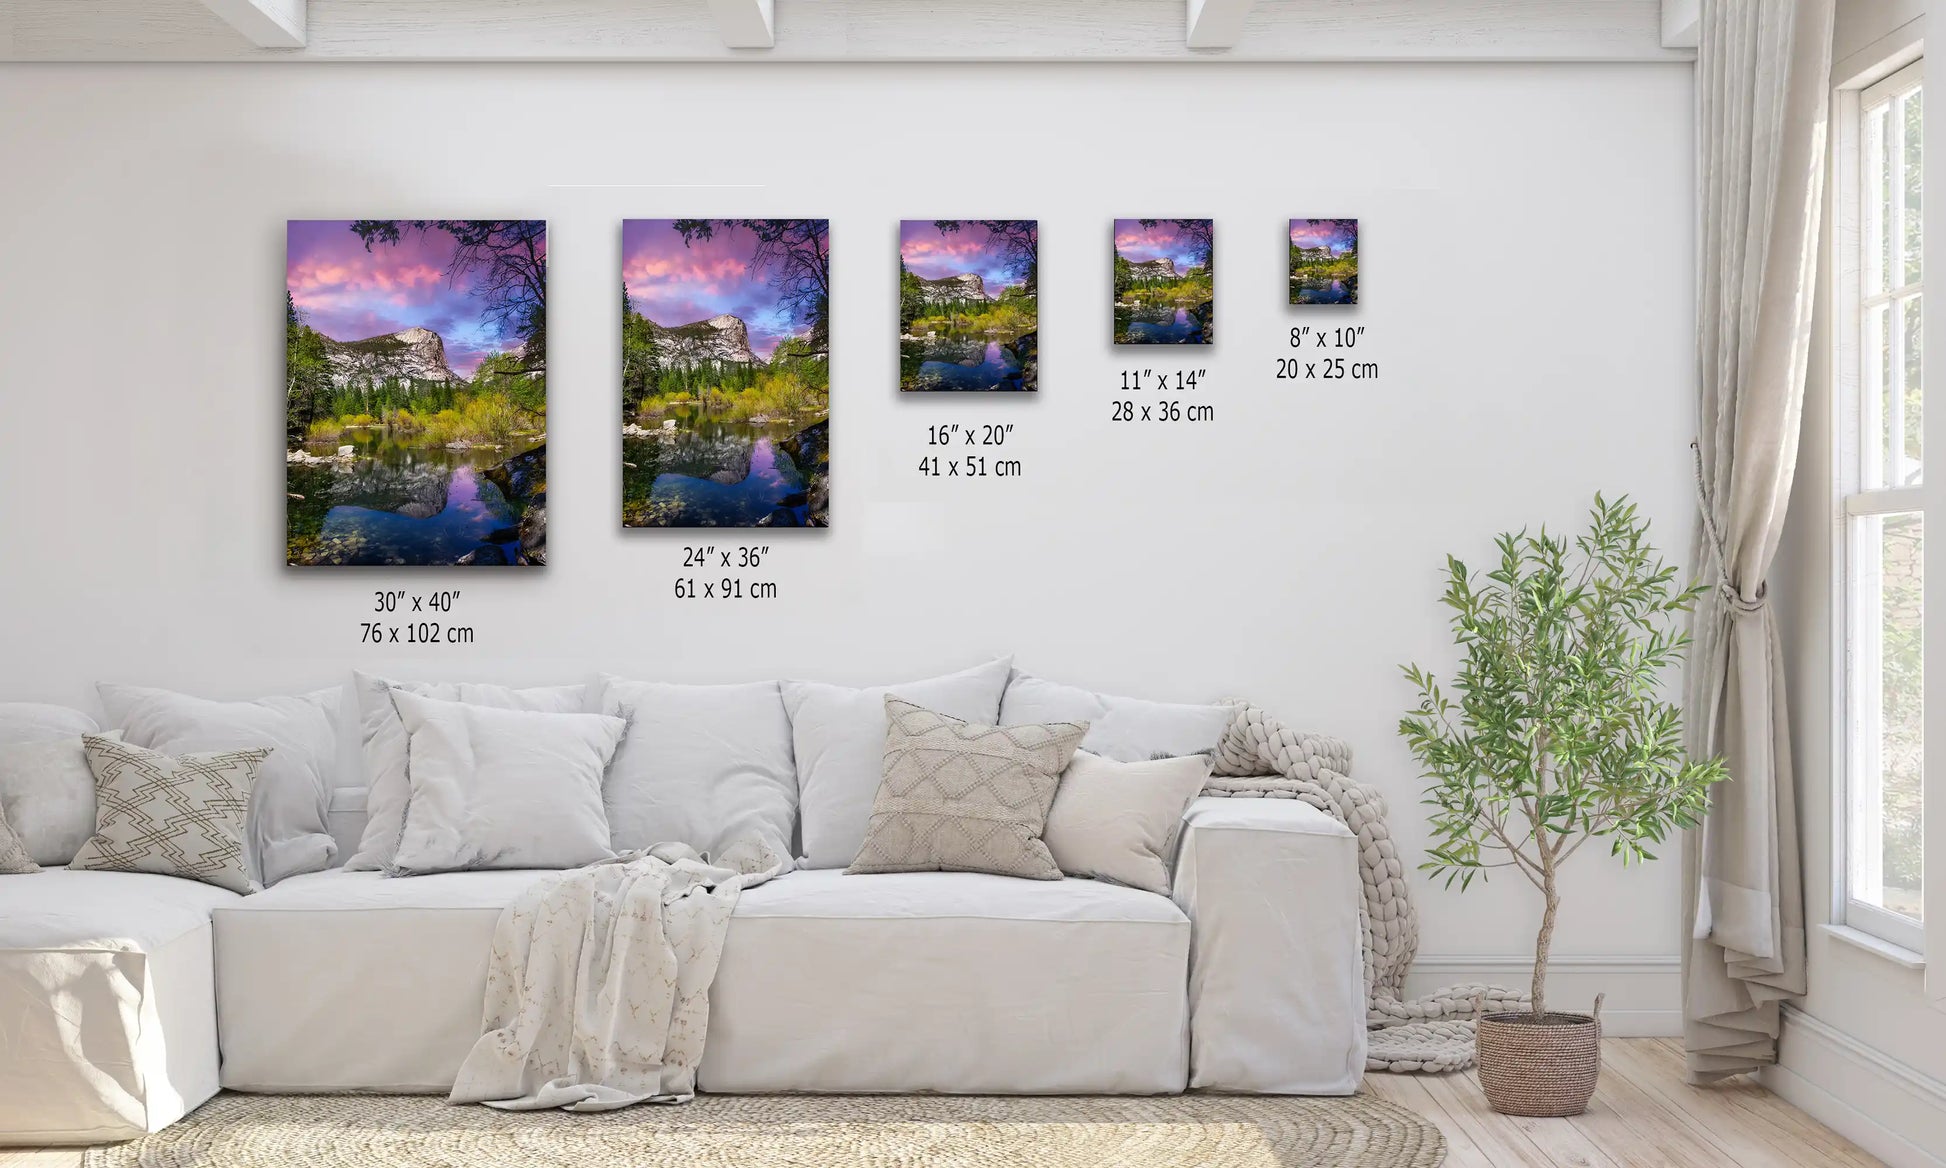 Assorted sizes of Mt. Watkins and Mirror Lake canvas prints on a living room wall, depicting peaceful Yosemite scenery.